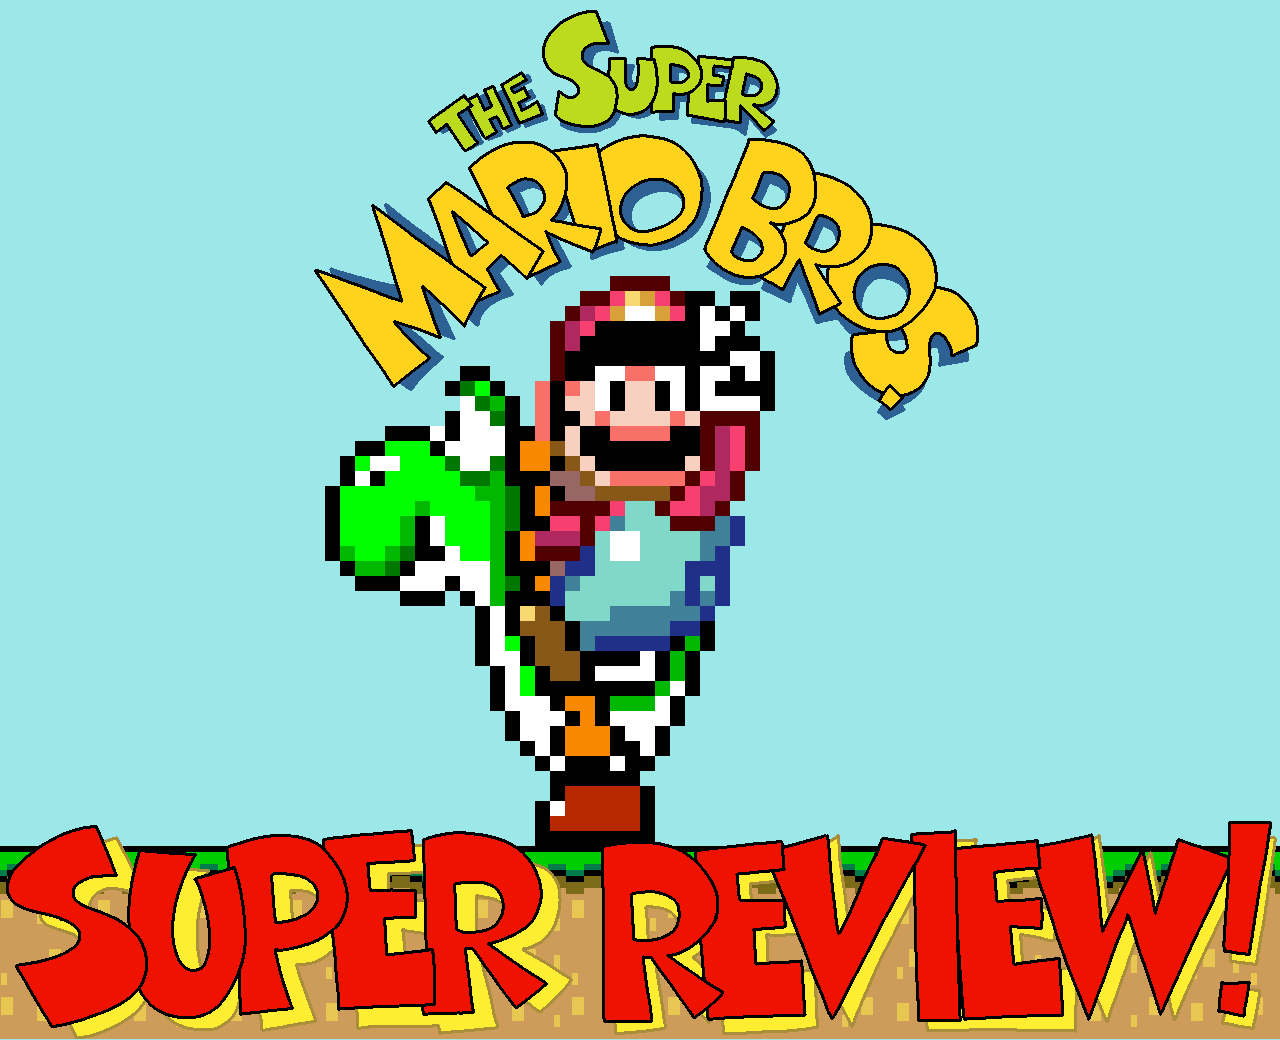 The Super Mario Bros. Super Review! (2021) - 15. Super Mario World (Unfinished).png